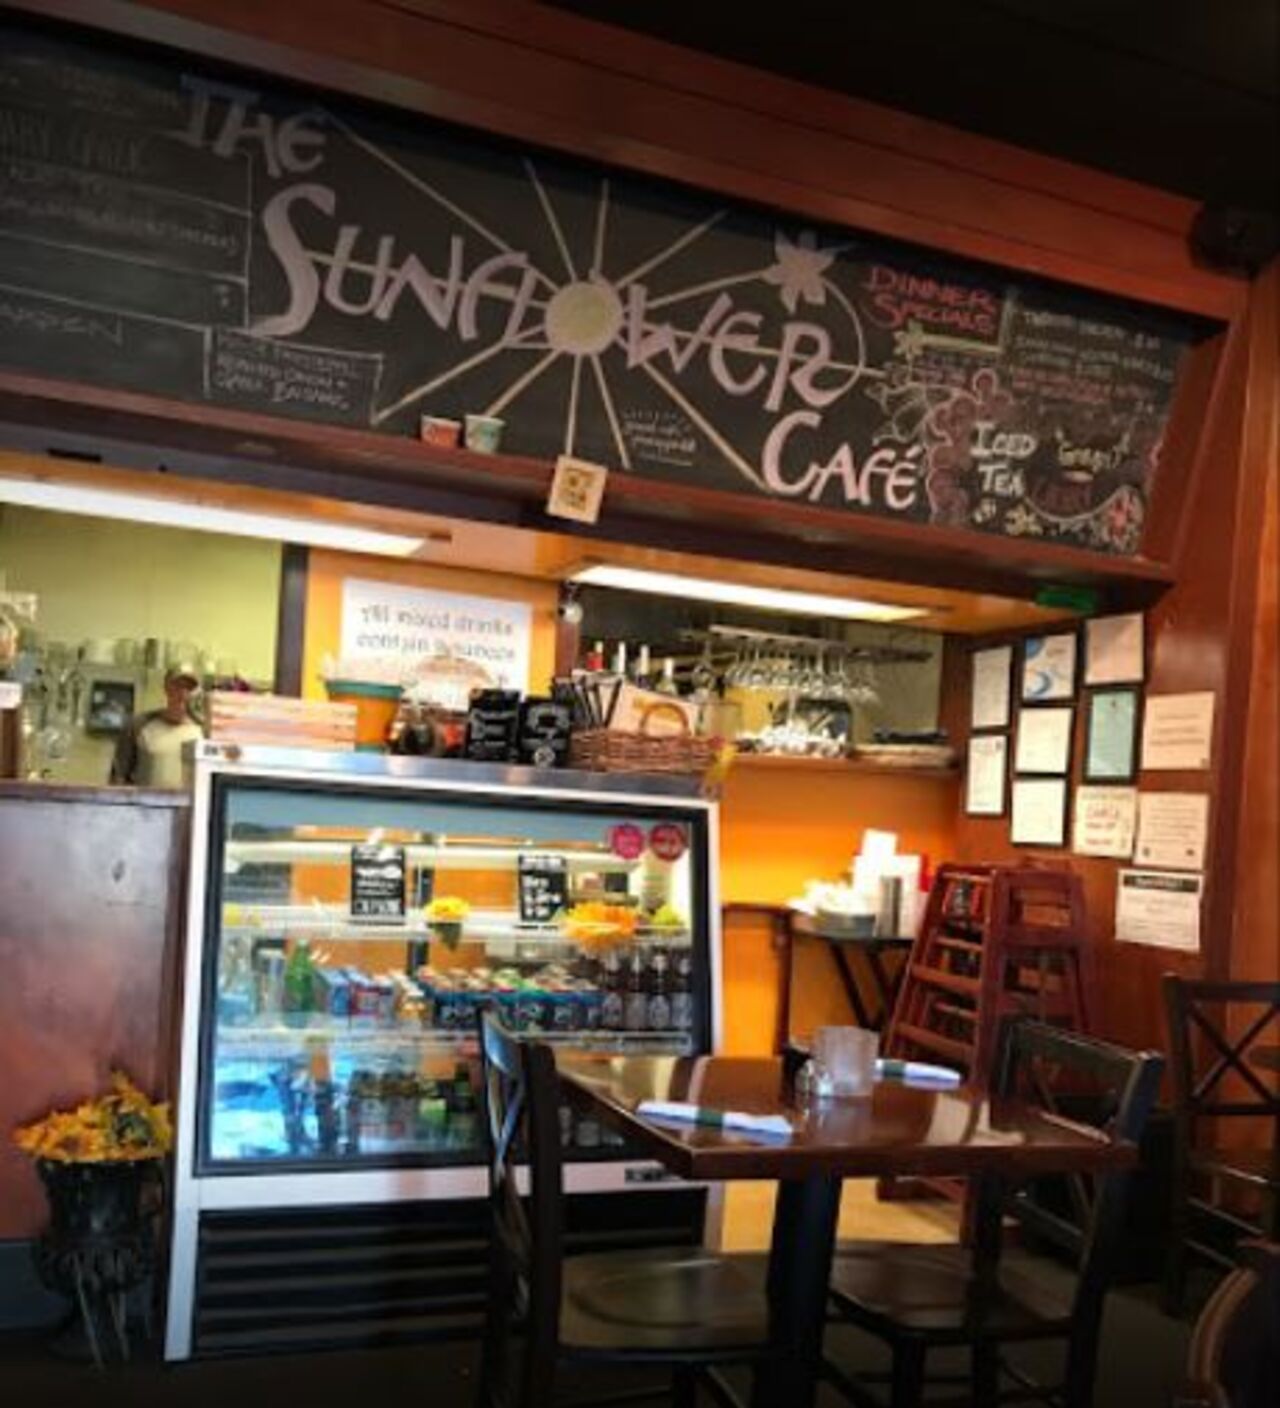 A photo of The Sunflower Cafe